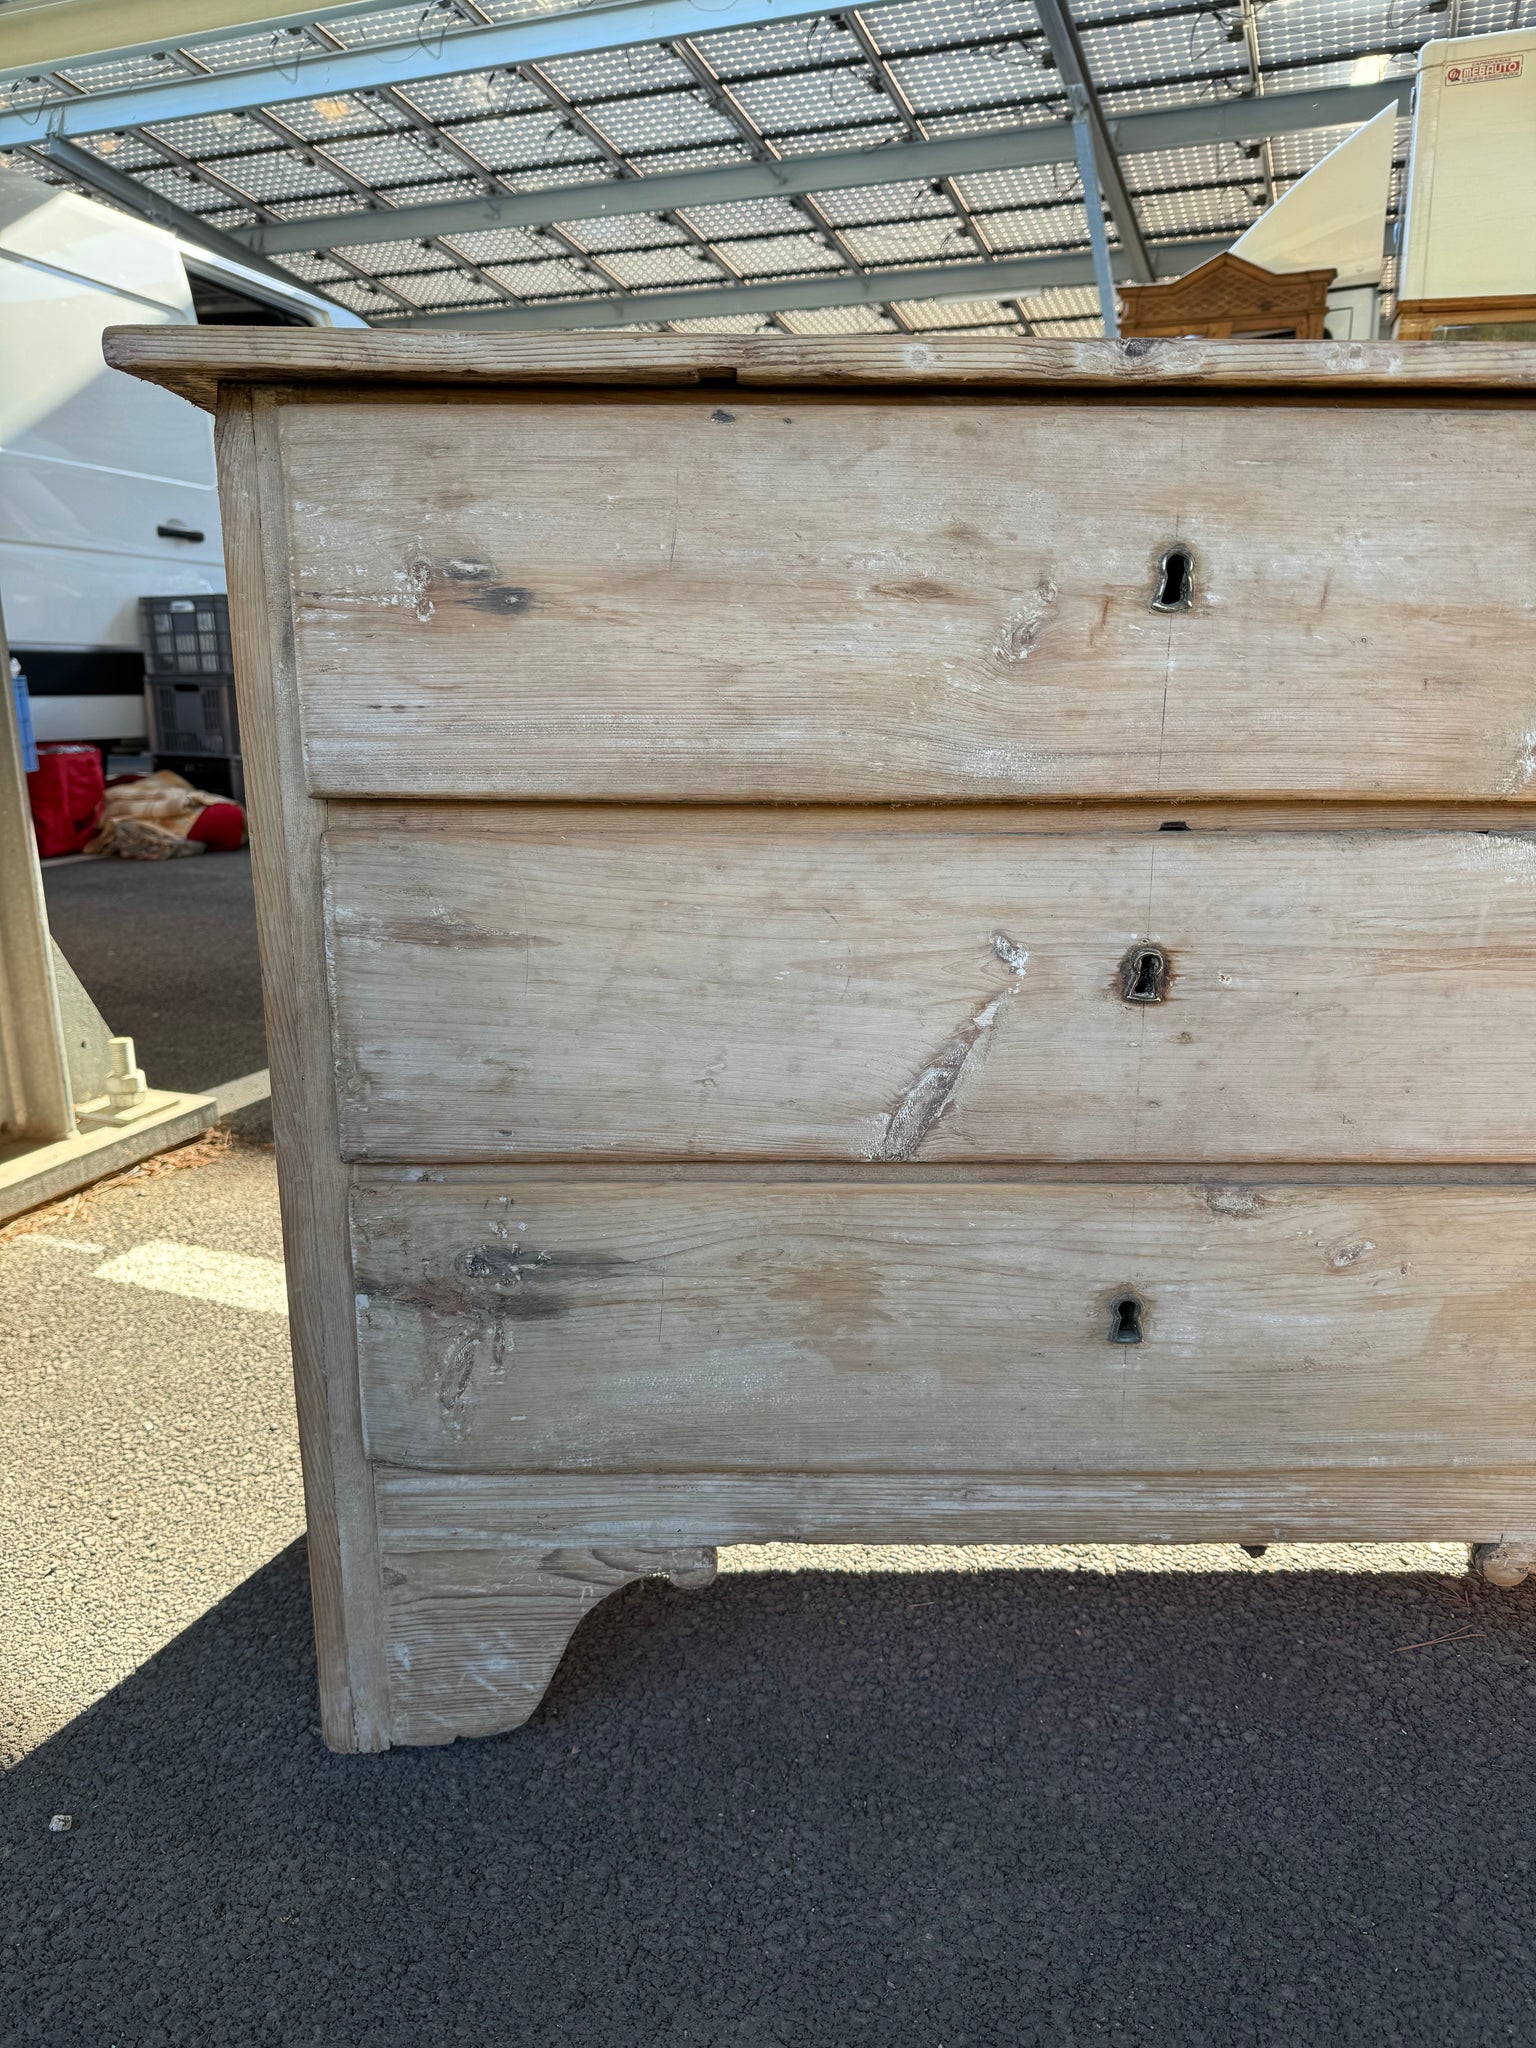 Spanish Bleached Chest of Drawers